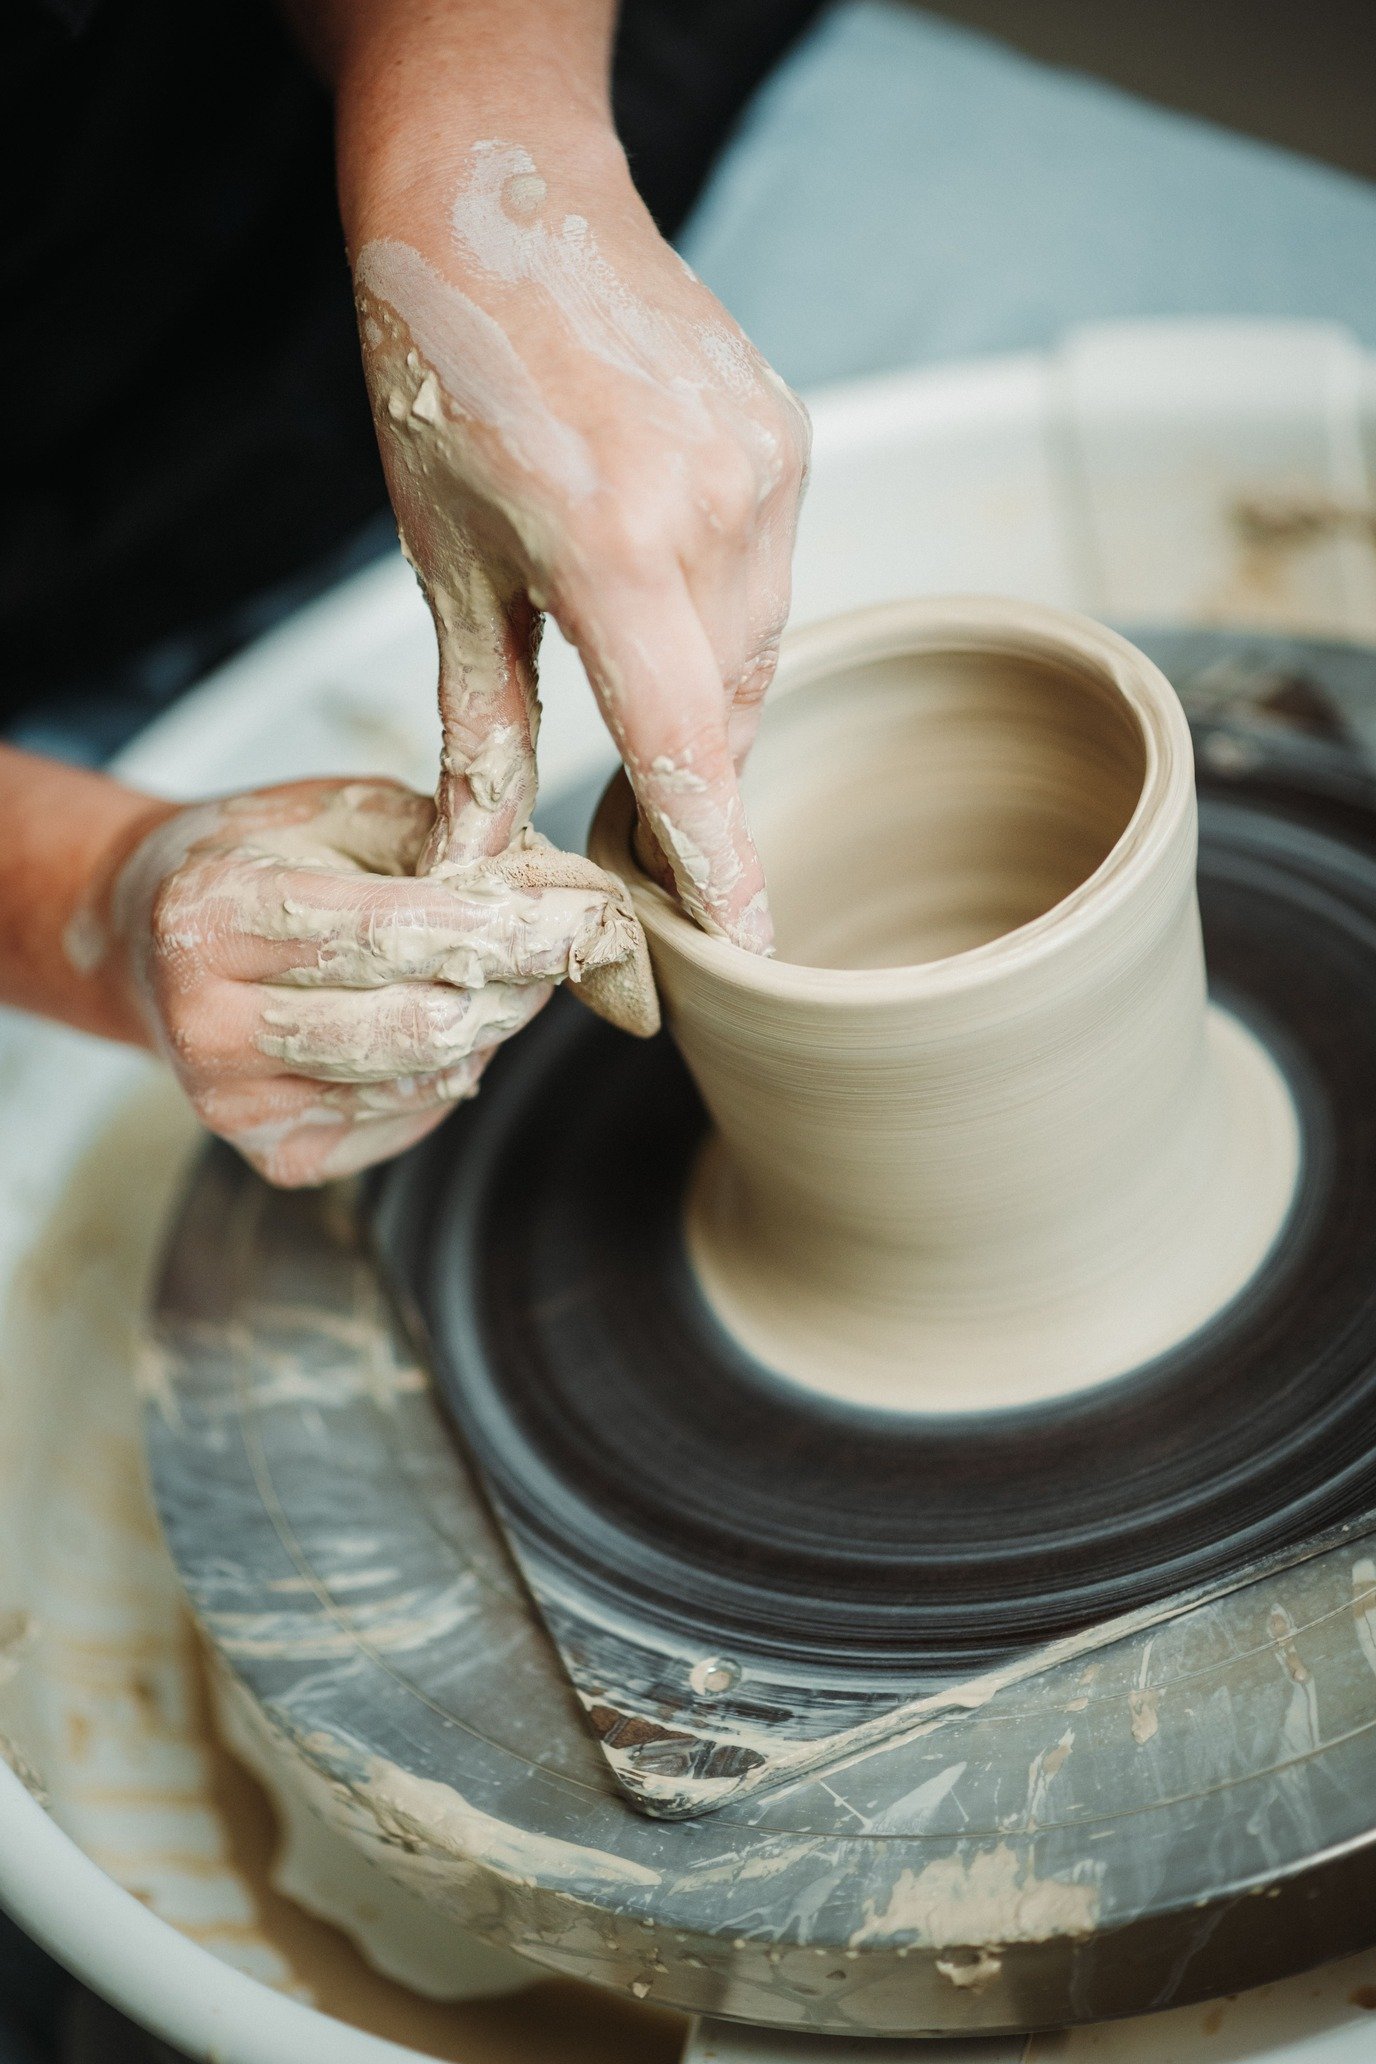 The Potter's Center: Clay, Kilns, Pottery Wheels, and Ceramic Supplies